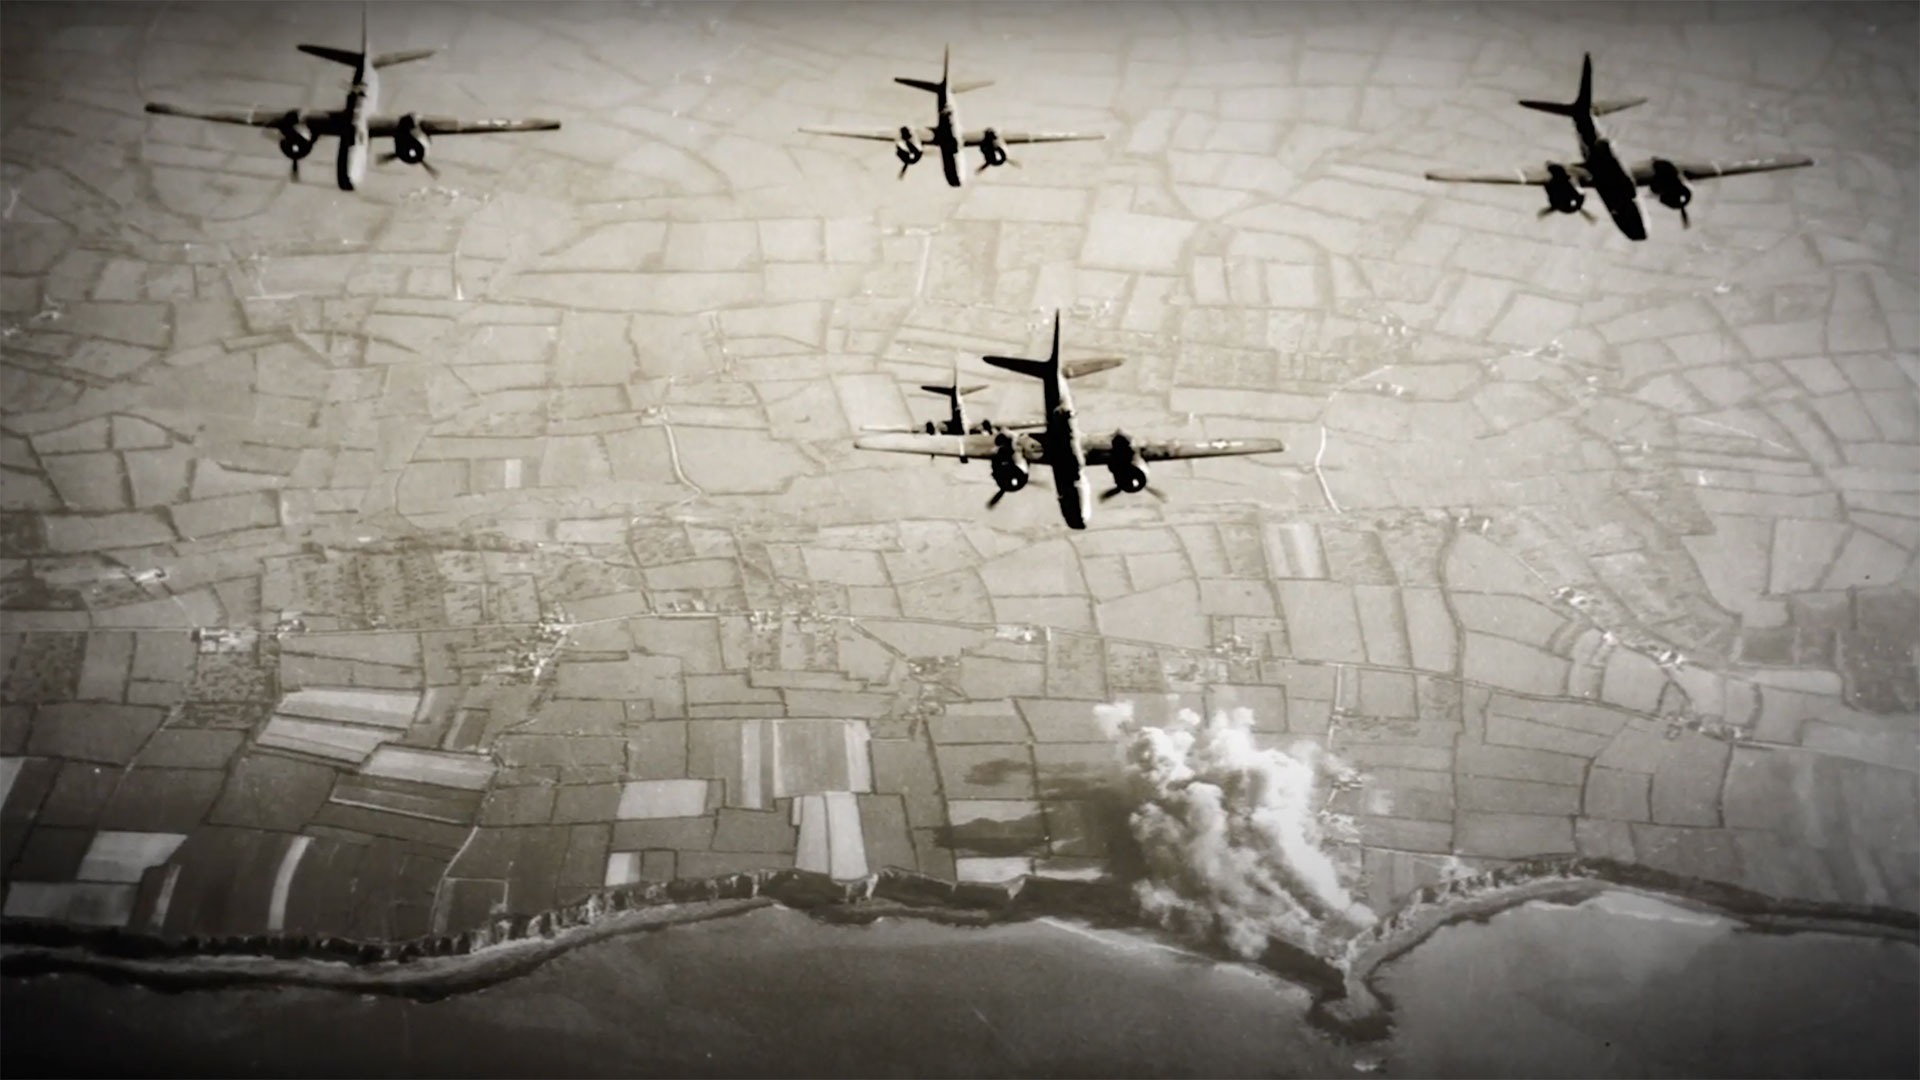 A photo of U.S. A-20 Havoc bombers during a bombing run over Pointe du Hoc before D-Day.